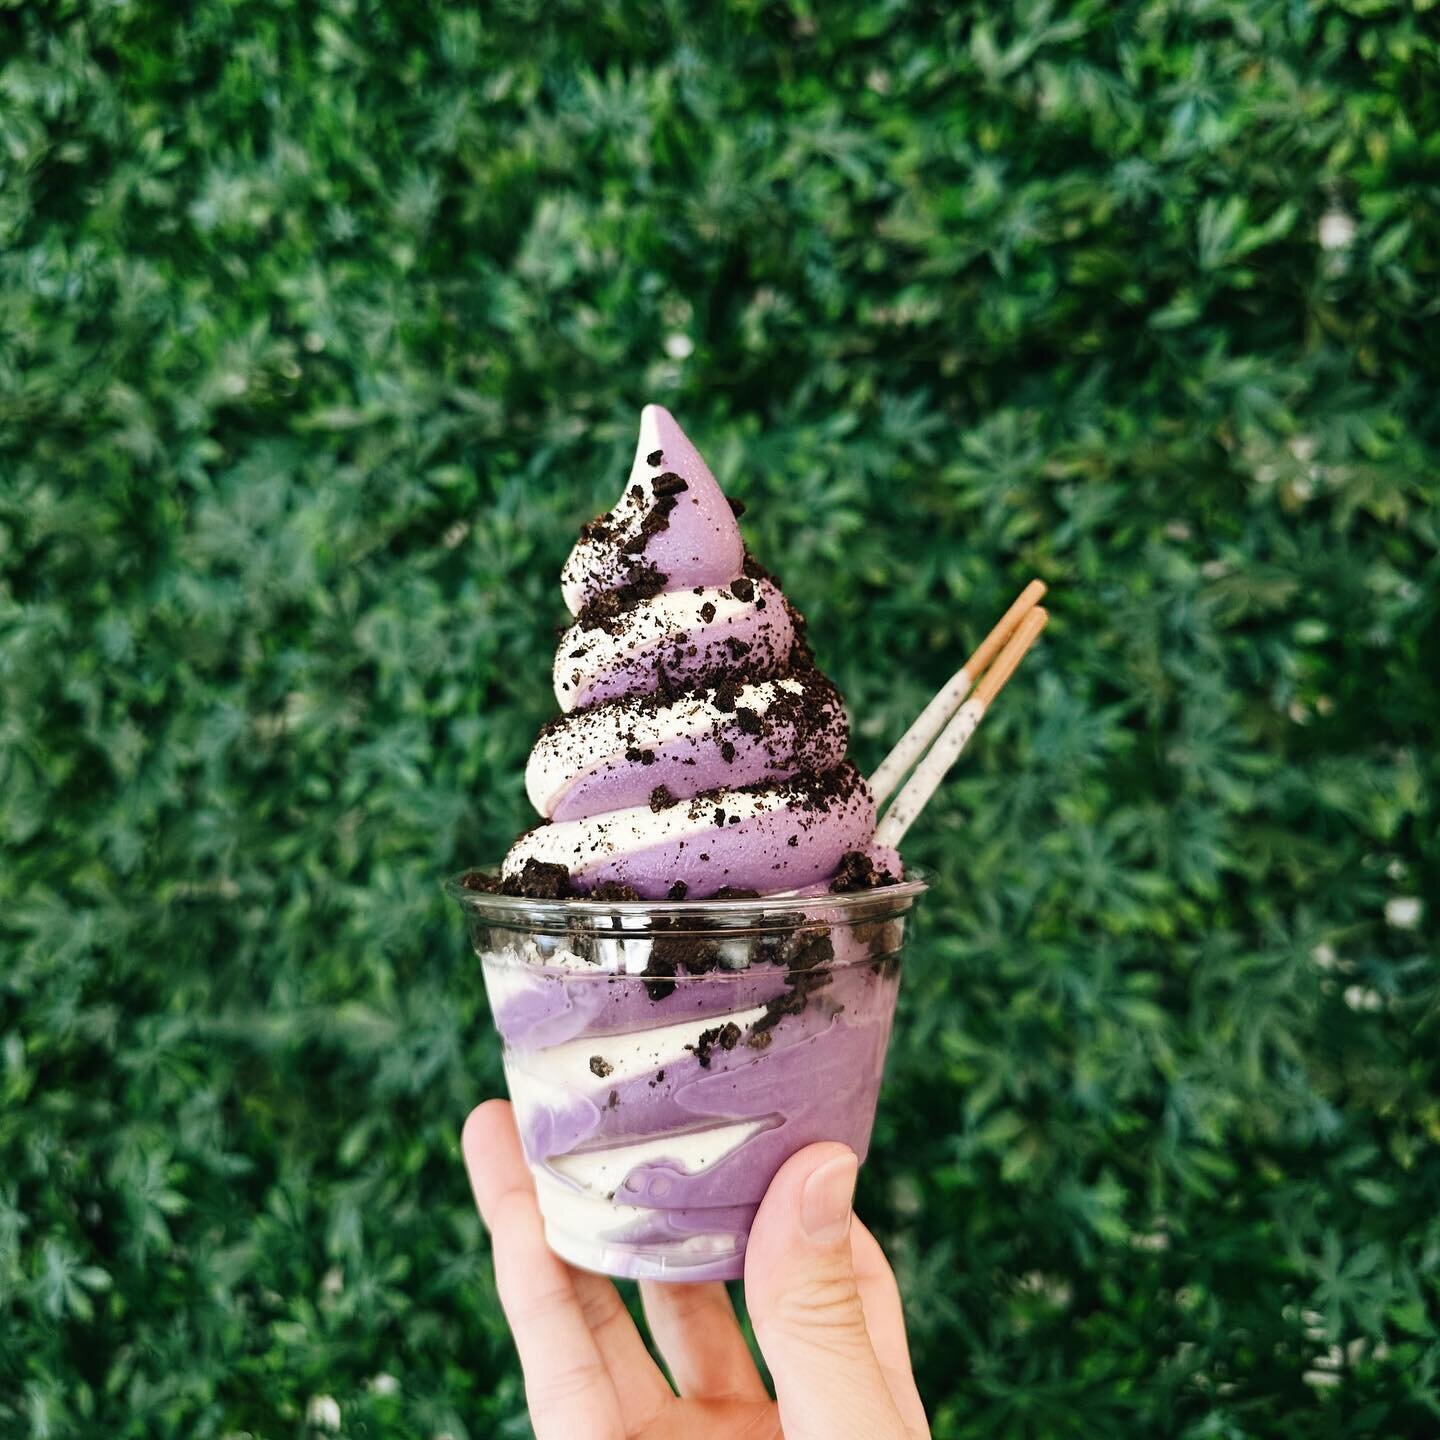 ITS BACK AND RIGHT ON TIME!

80 degrees outside? We got you covered! Our Ube or strawberry shortcake softserve will cool you off all summer!